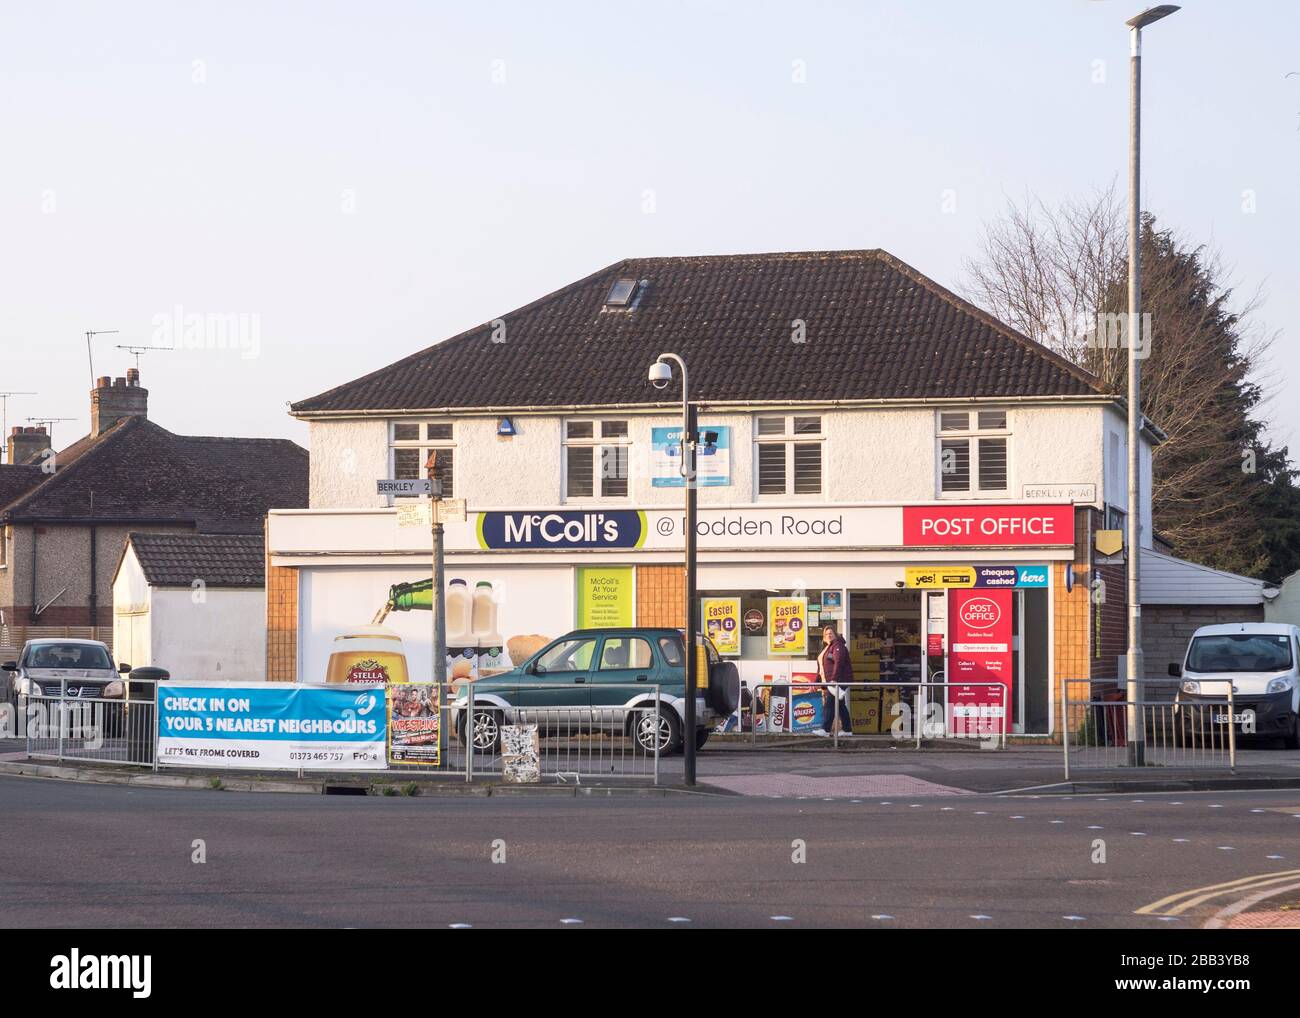 Look in on your 5 nearest neighbours sign outside a convenience store in Frome during the Covid-19 pandemic lockdown, March 2020. Stock Photo